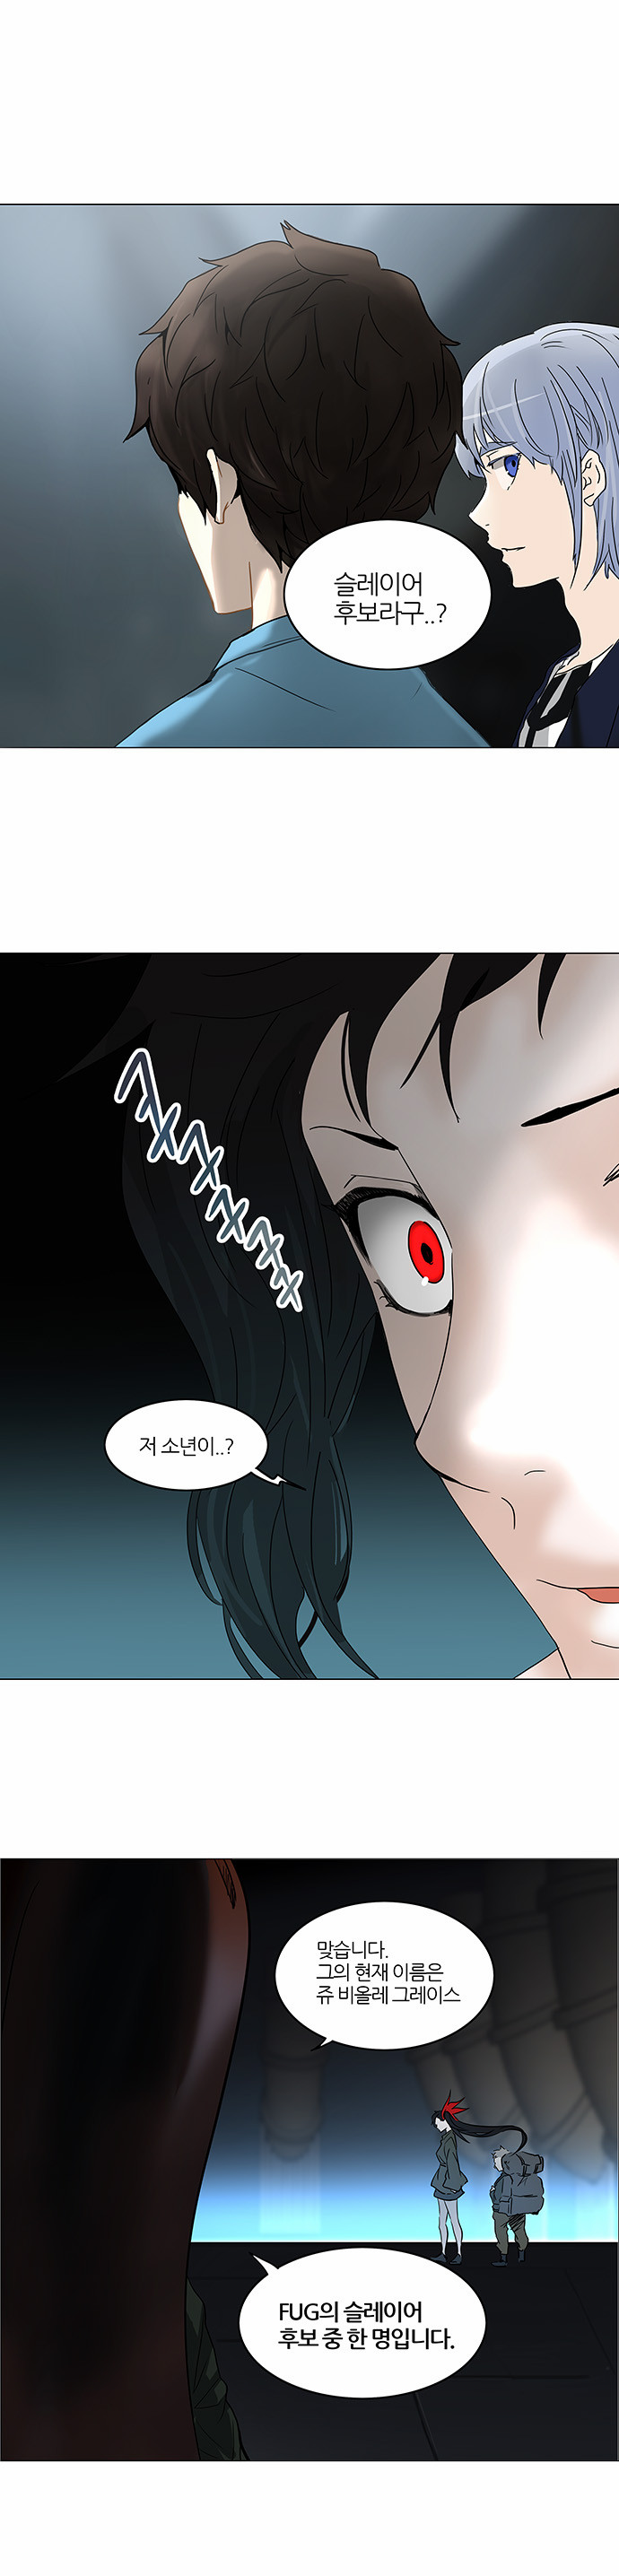 Tower of God - Chapter 255 - Page 1